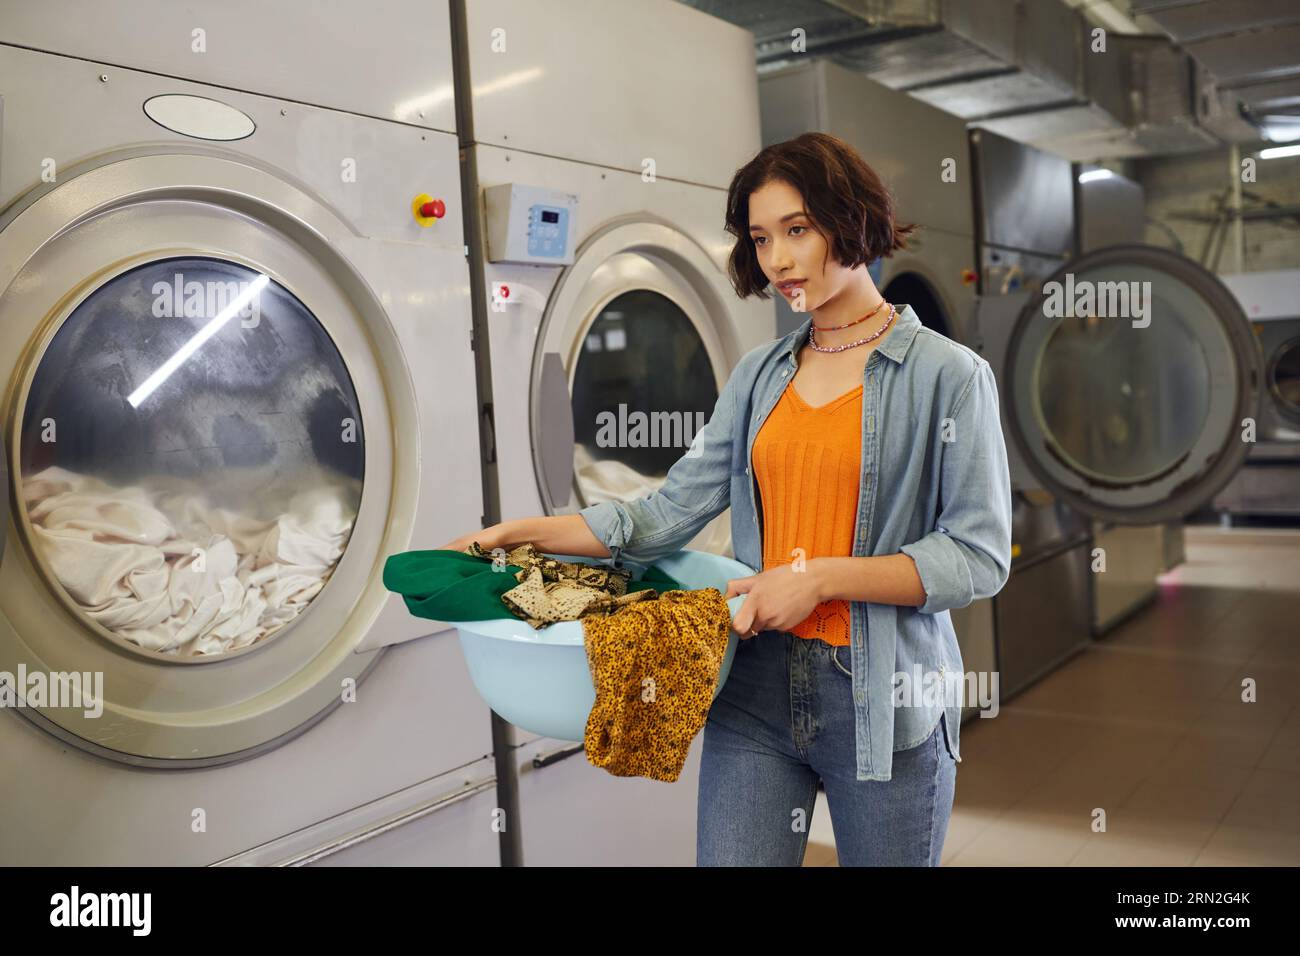 young asian woman holding basket with clothes near washing machines in public laundry Stock Photo